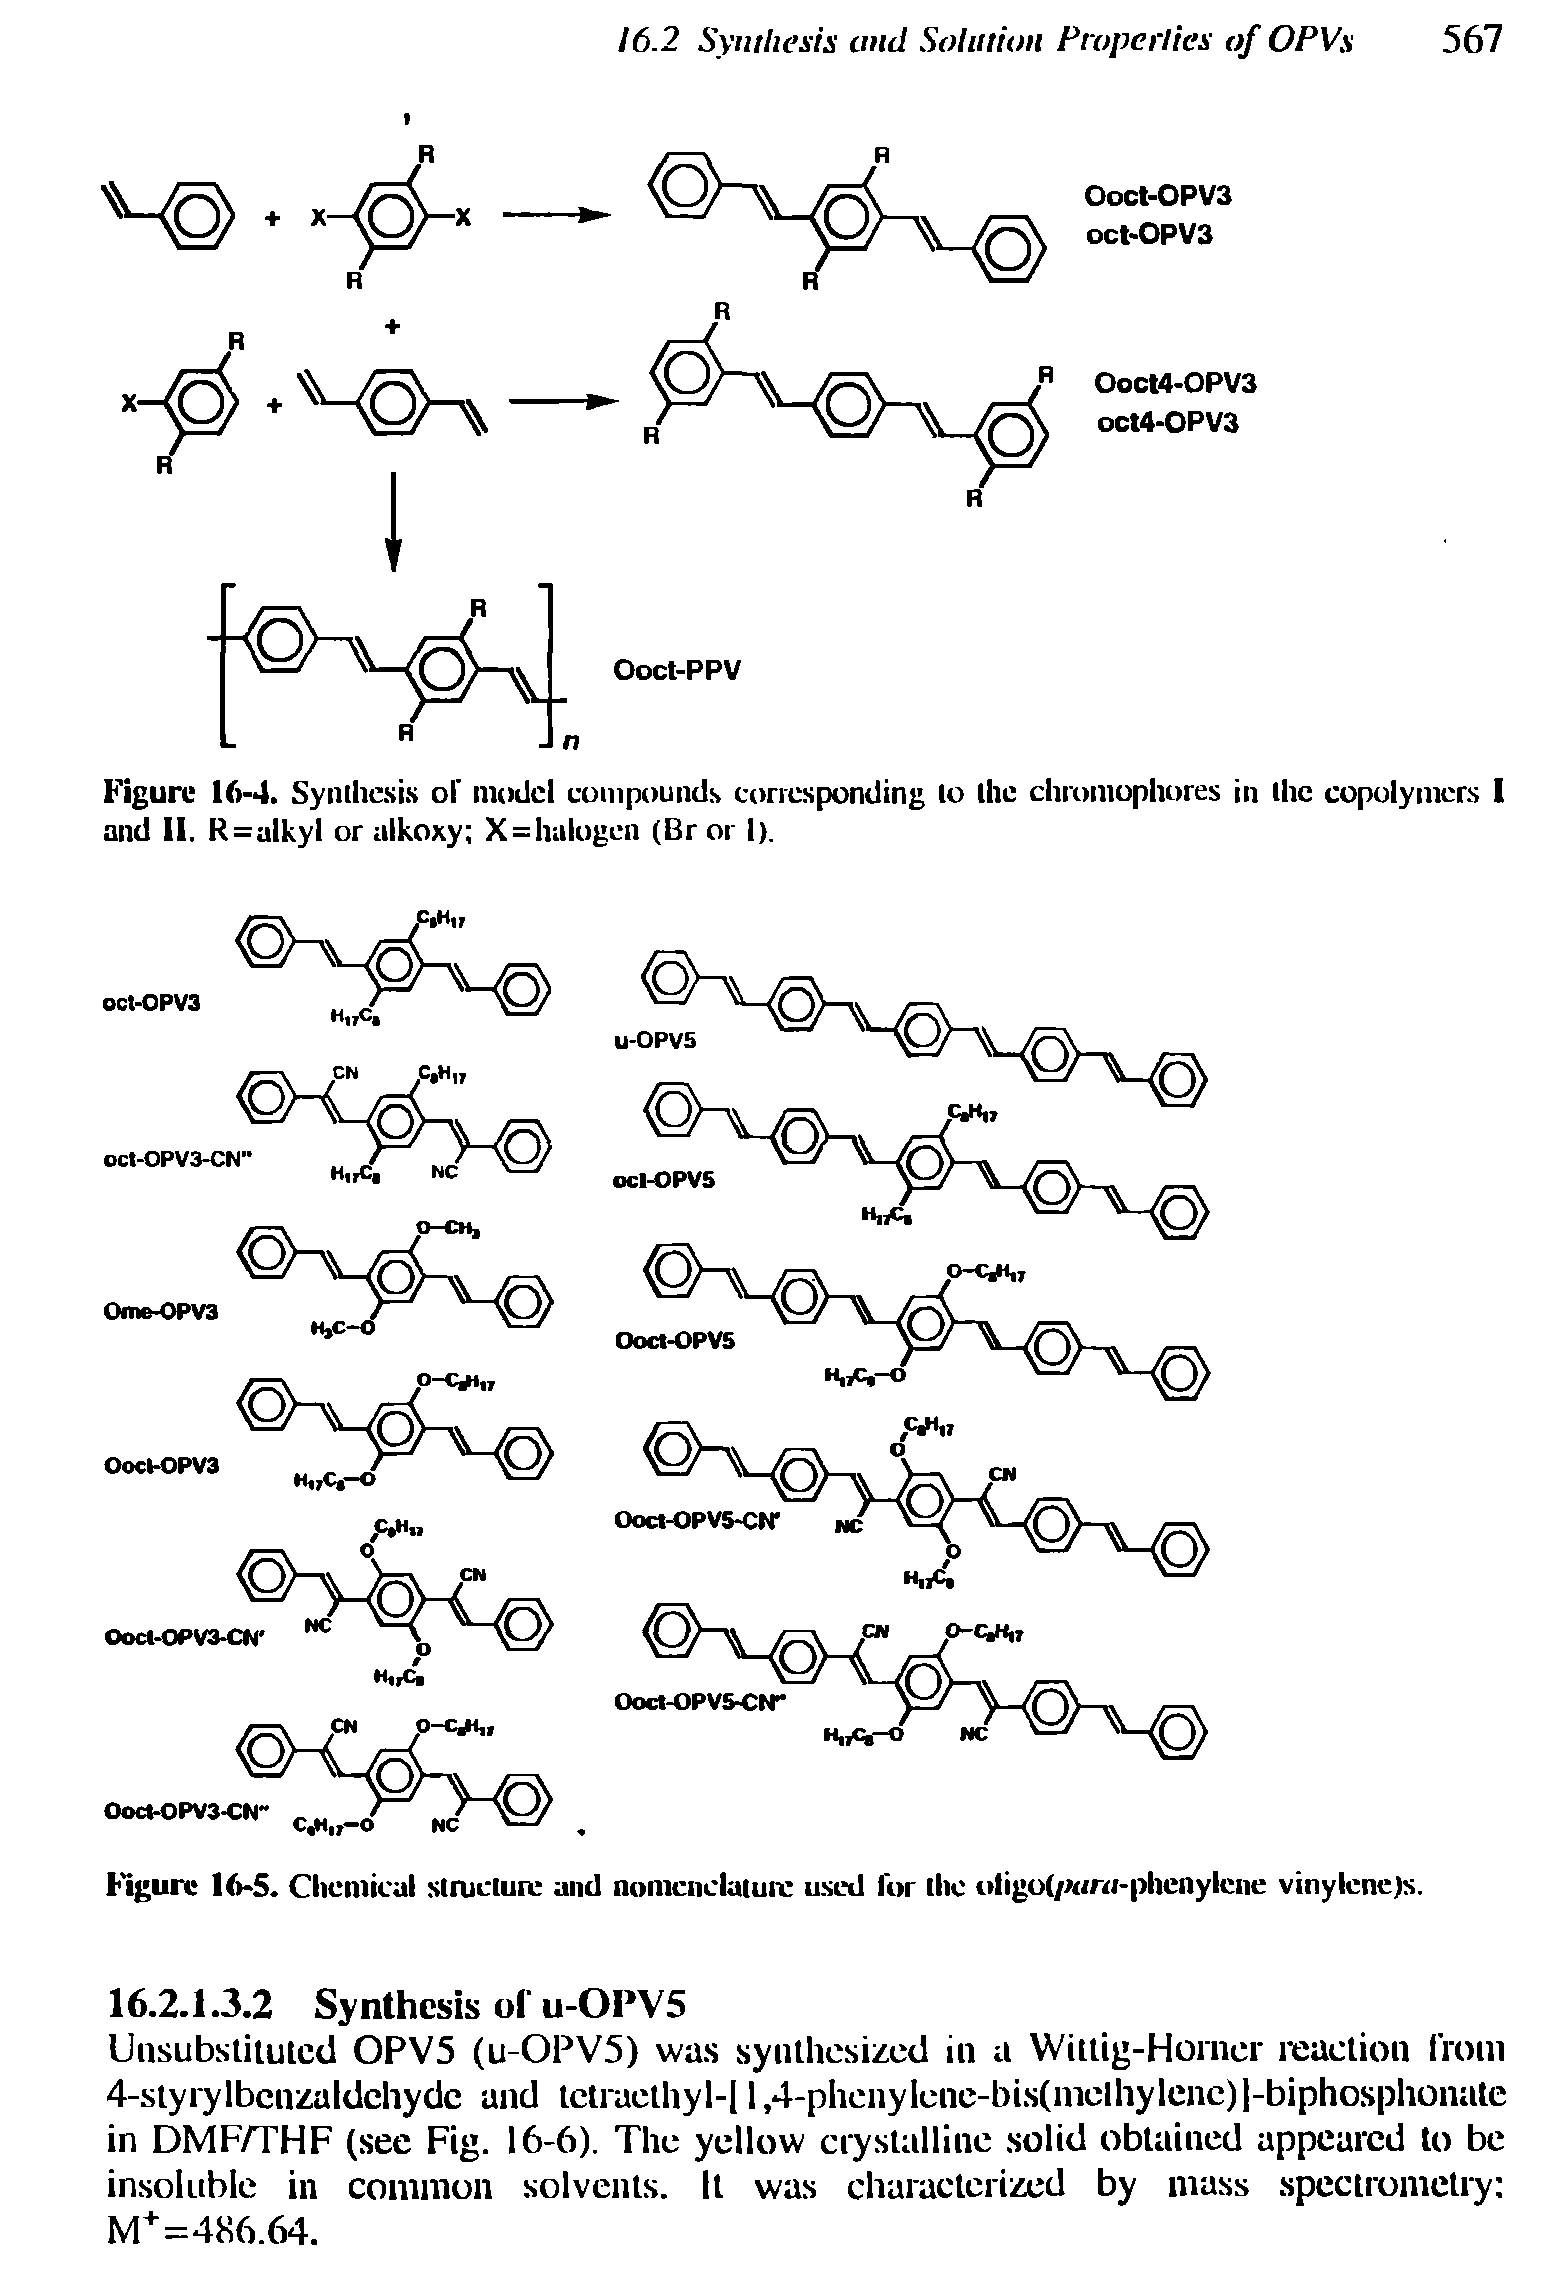 Figure 16-5. Chemical structure and nomenclature used for the oligol/runr-phenylcne vinylcne)s.